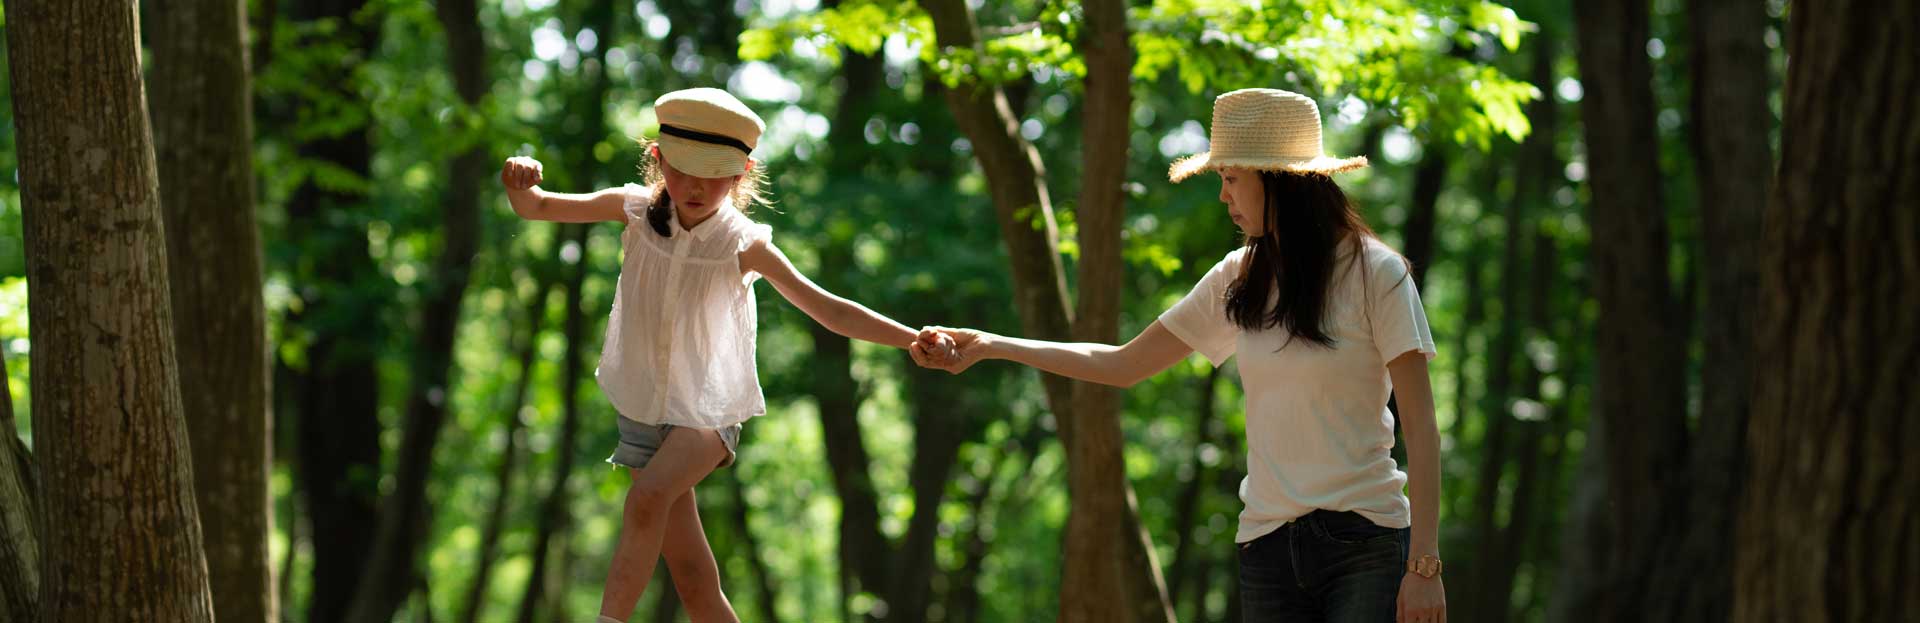 A mother helps her child navigate balance poles in the woods